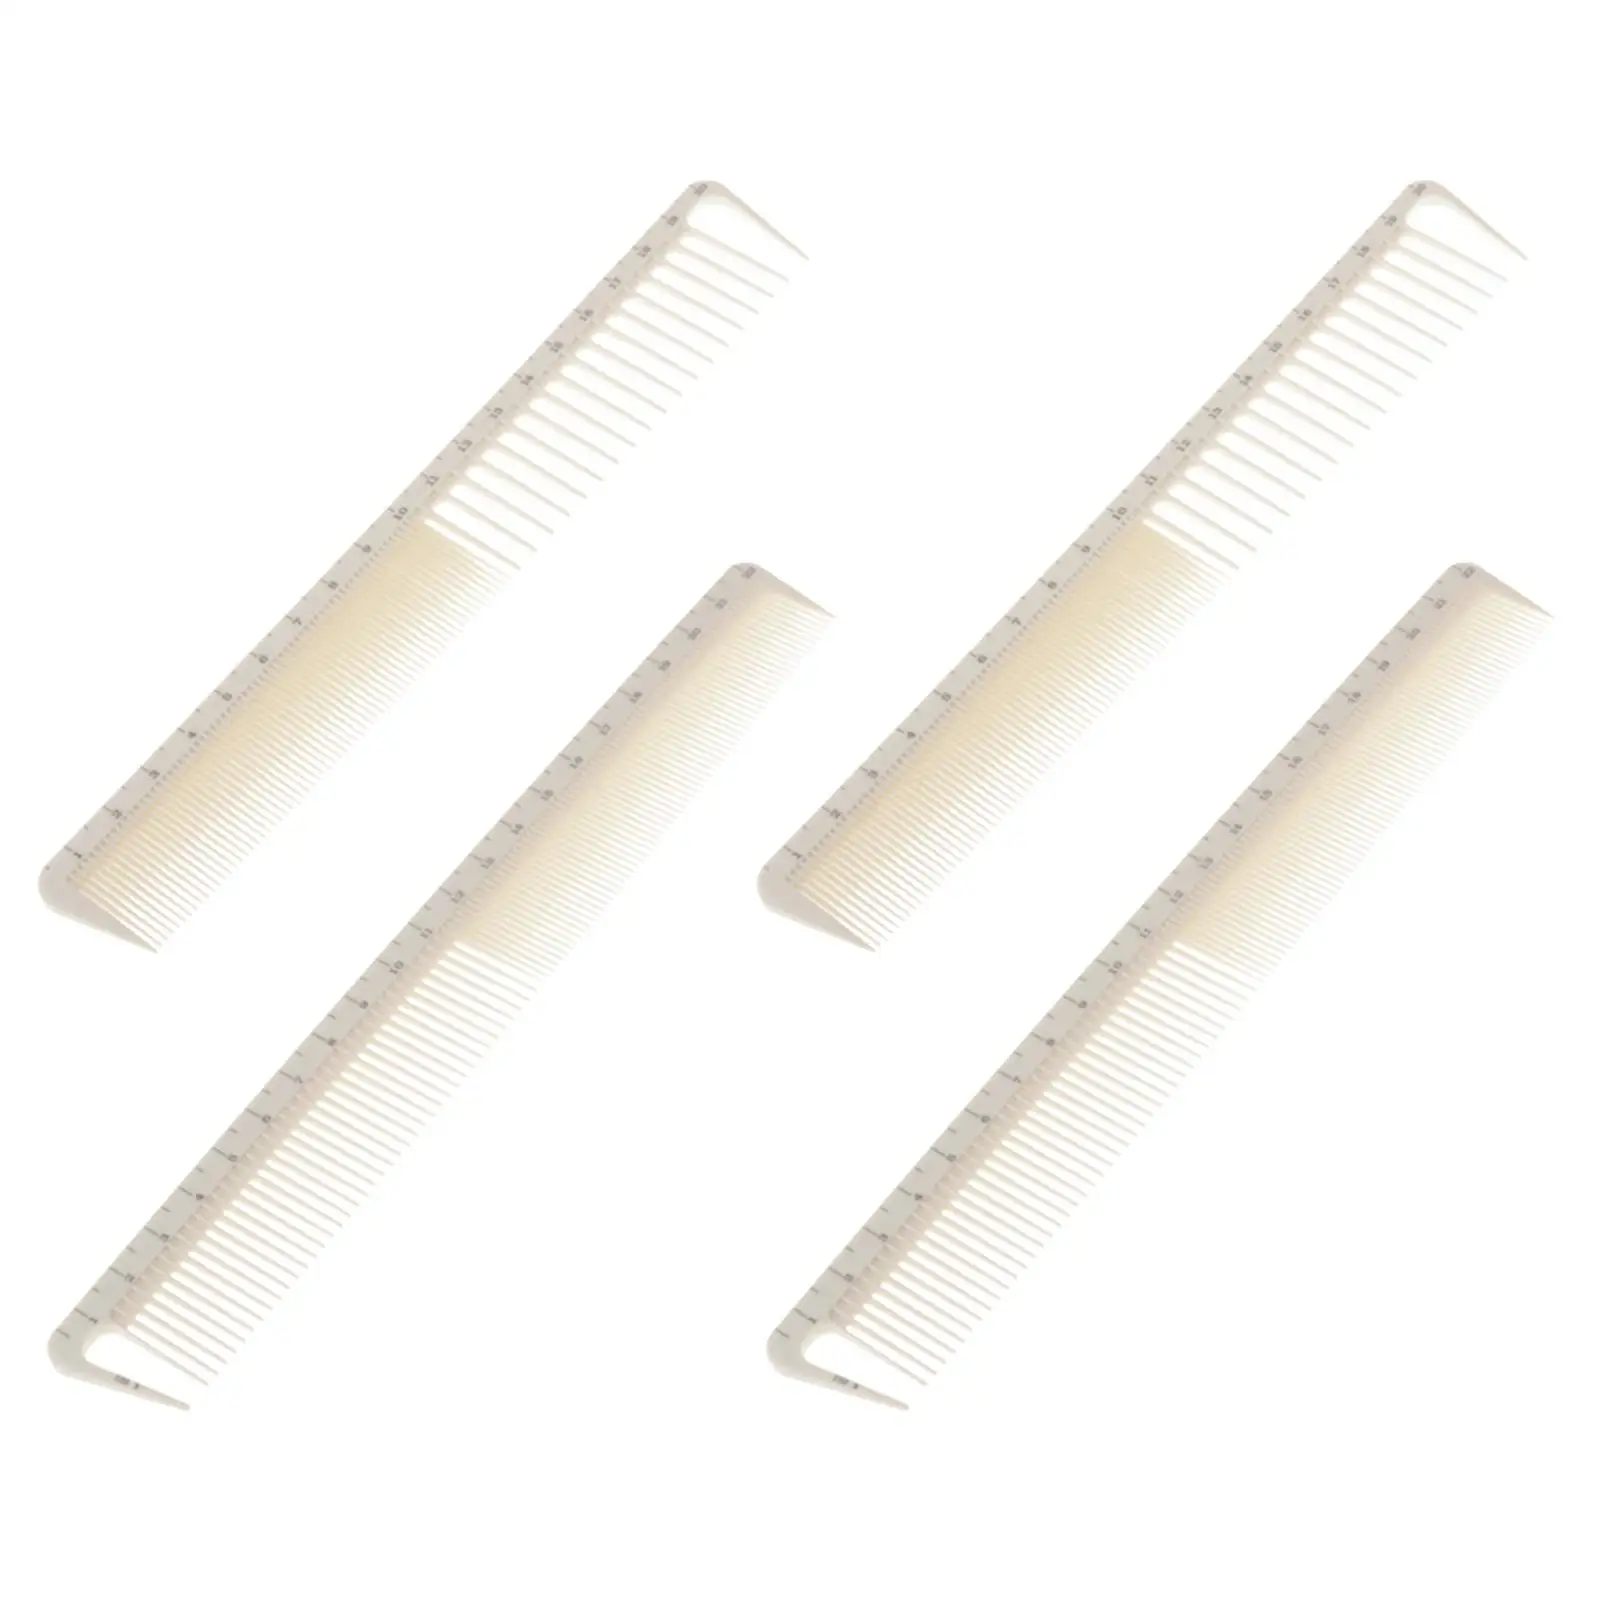 4x Professional Salon Barber Hairdressing Resin Comb Hair Comb